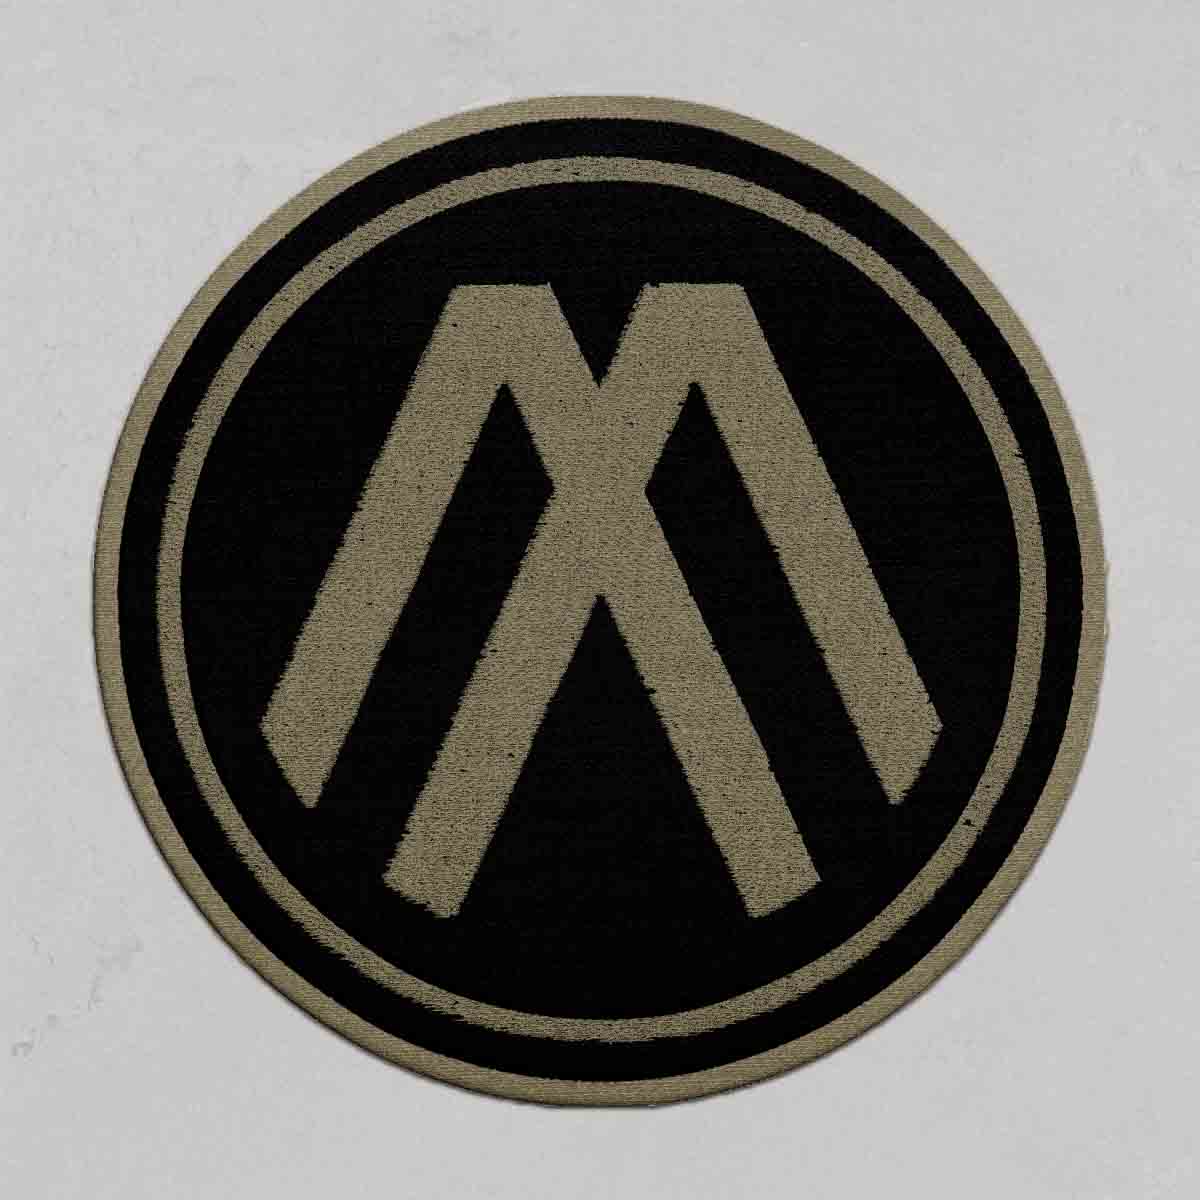 CARNAL NOTHING MORE LOGO PATCH PRE-ORDER